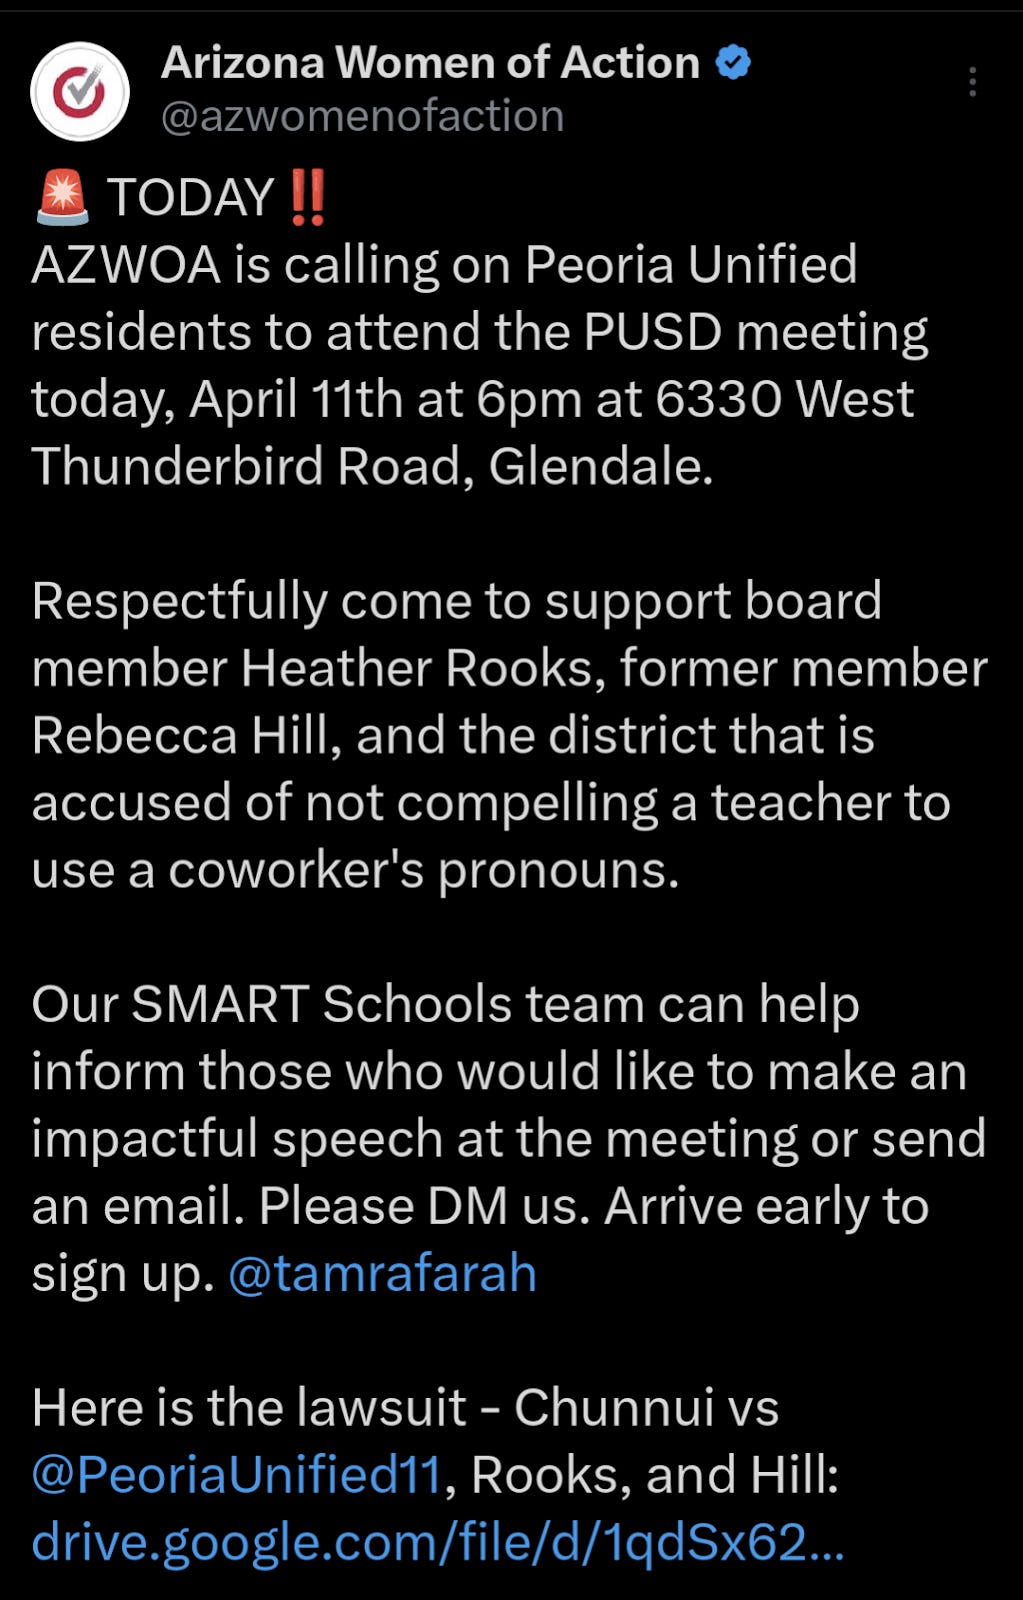 Xitter post from AZ Women of Action calling for members to come support Heather Rooks at the PUSD Board Meeting and make "impactful speeches"